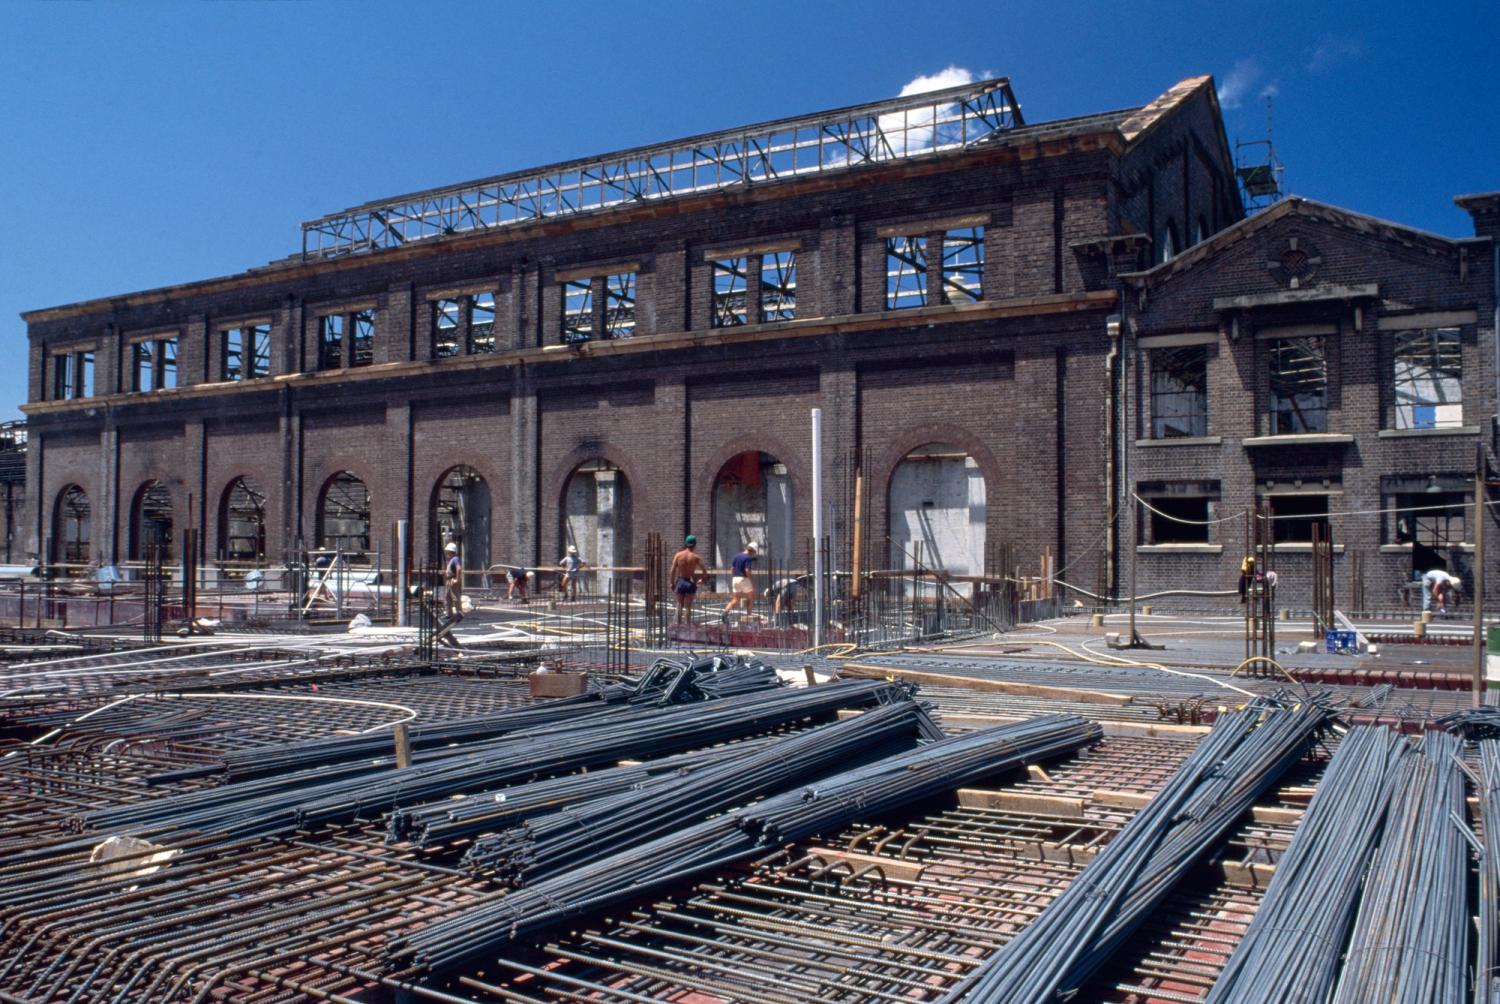 Colour Photograph of construction site with steel bars in the foreground, and a gutted brick building in the background and construction works walking through the frame